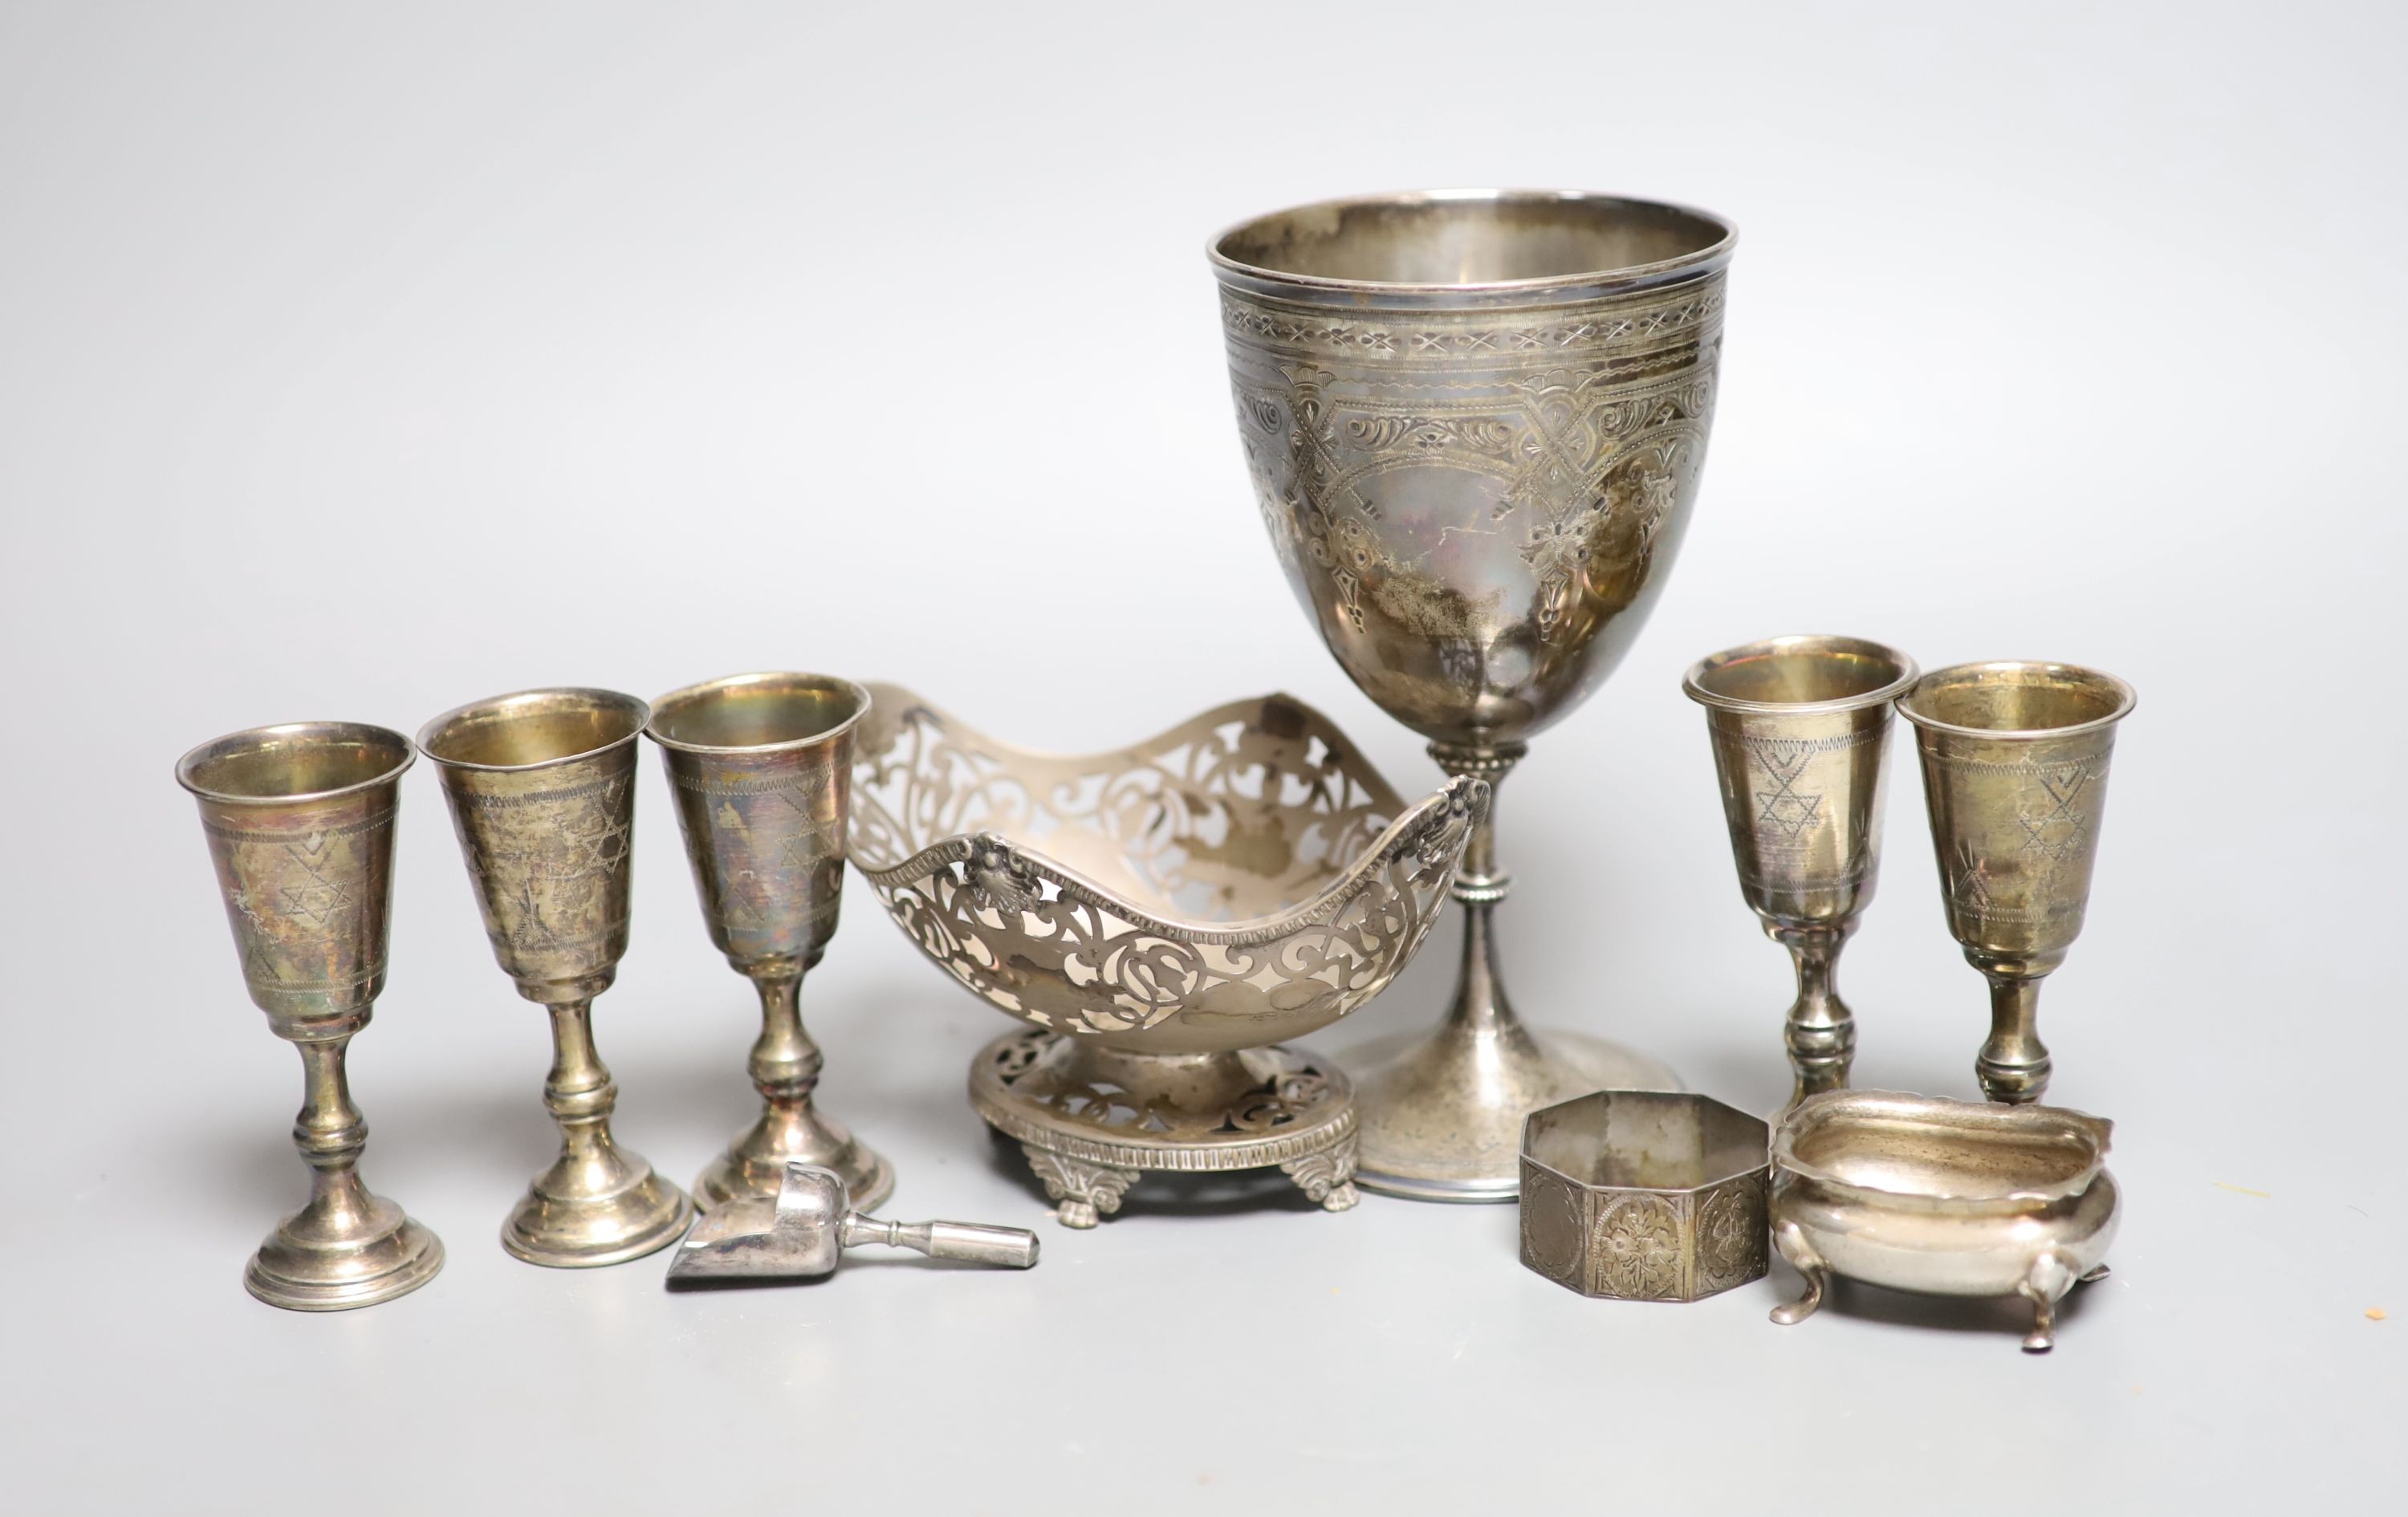 Five George V silver kiddush cups, a late Victorian silver goblet, a silver bonbon dish, silver salt, silver napkin ring and a plated sugar shovel